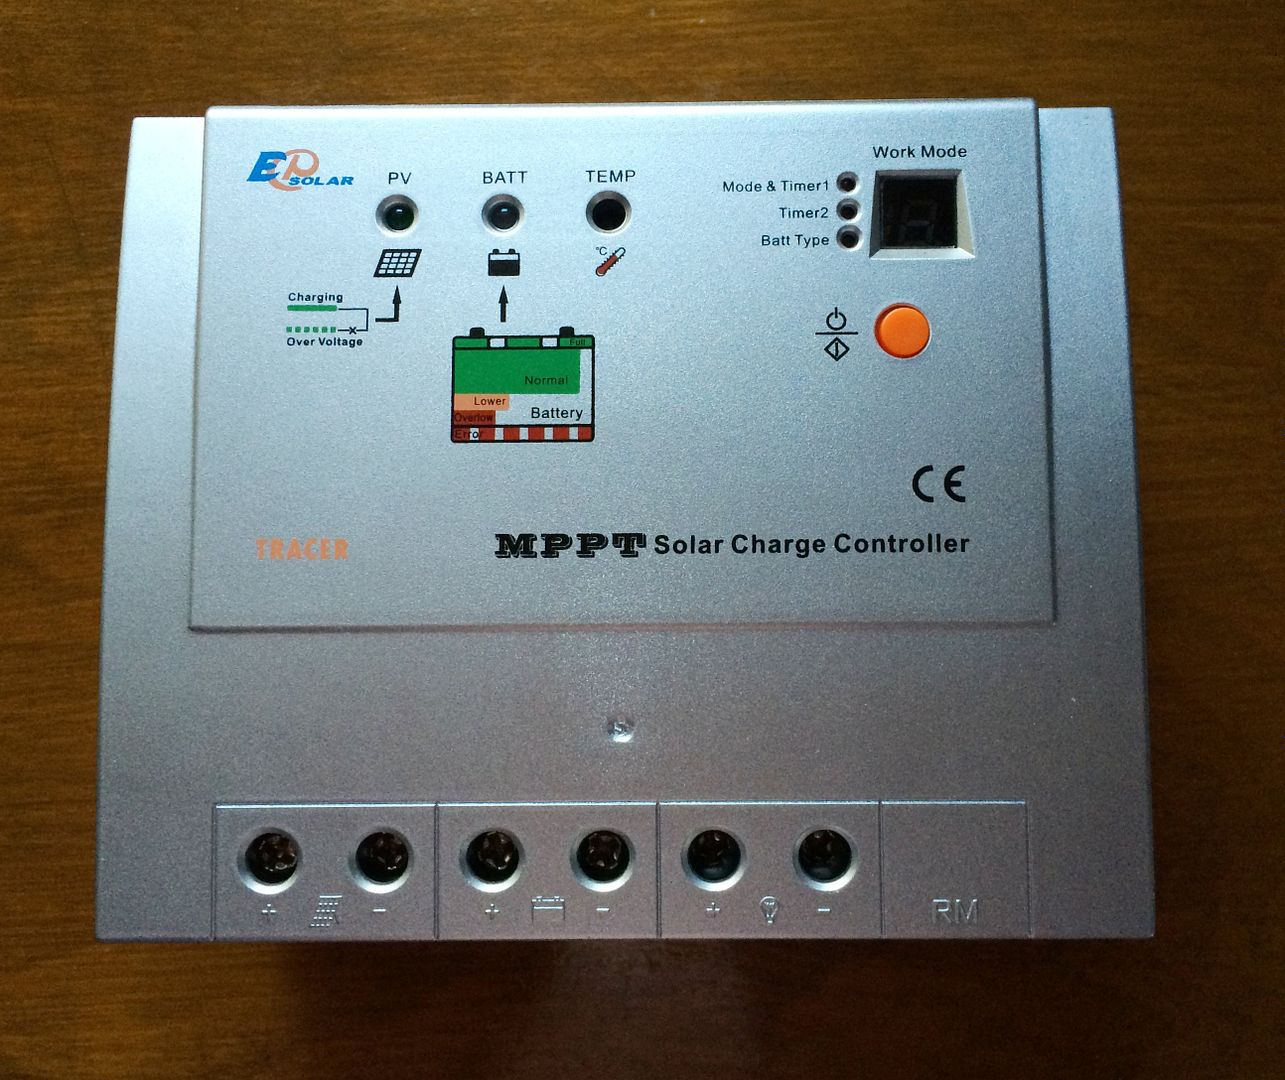 Prior to last week, I was using this MPPT solar charge controller